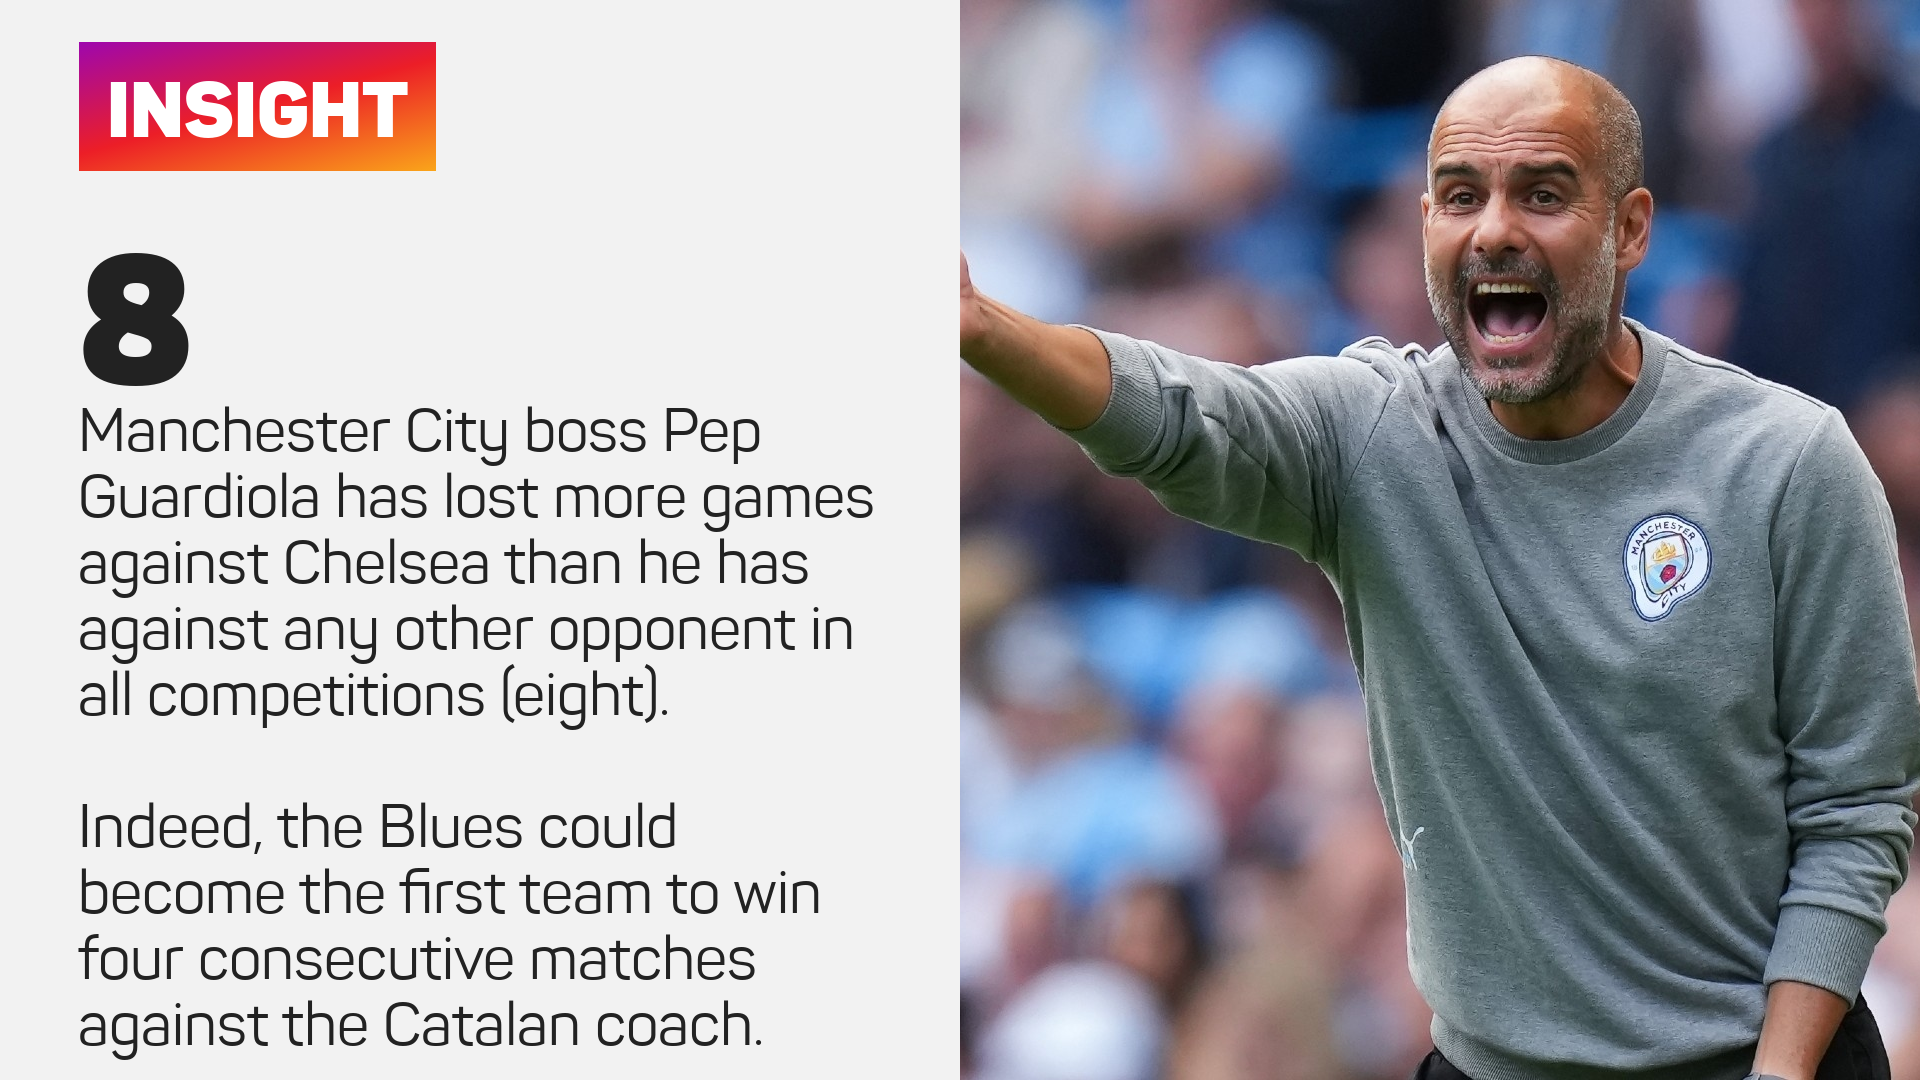 Pep Guardiola has suffered eight defeats to Chelsea